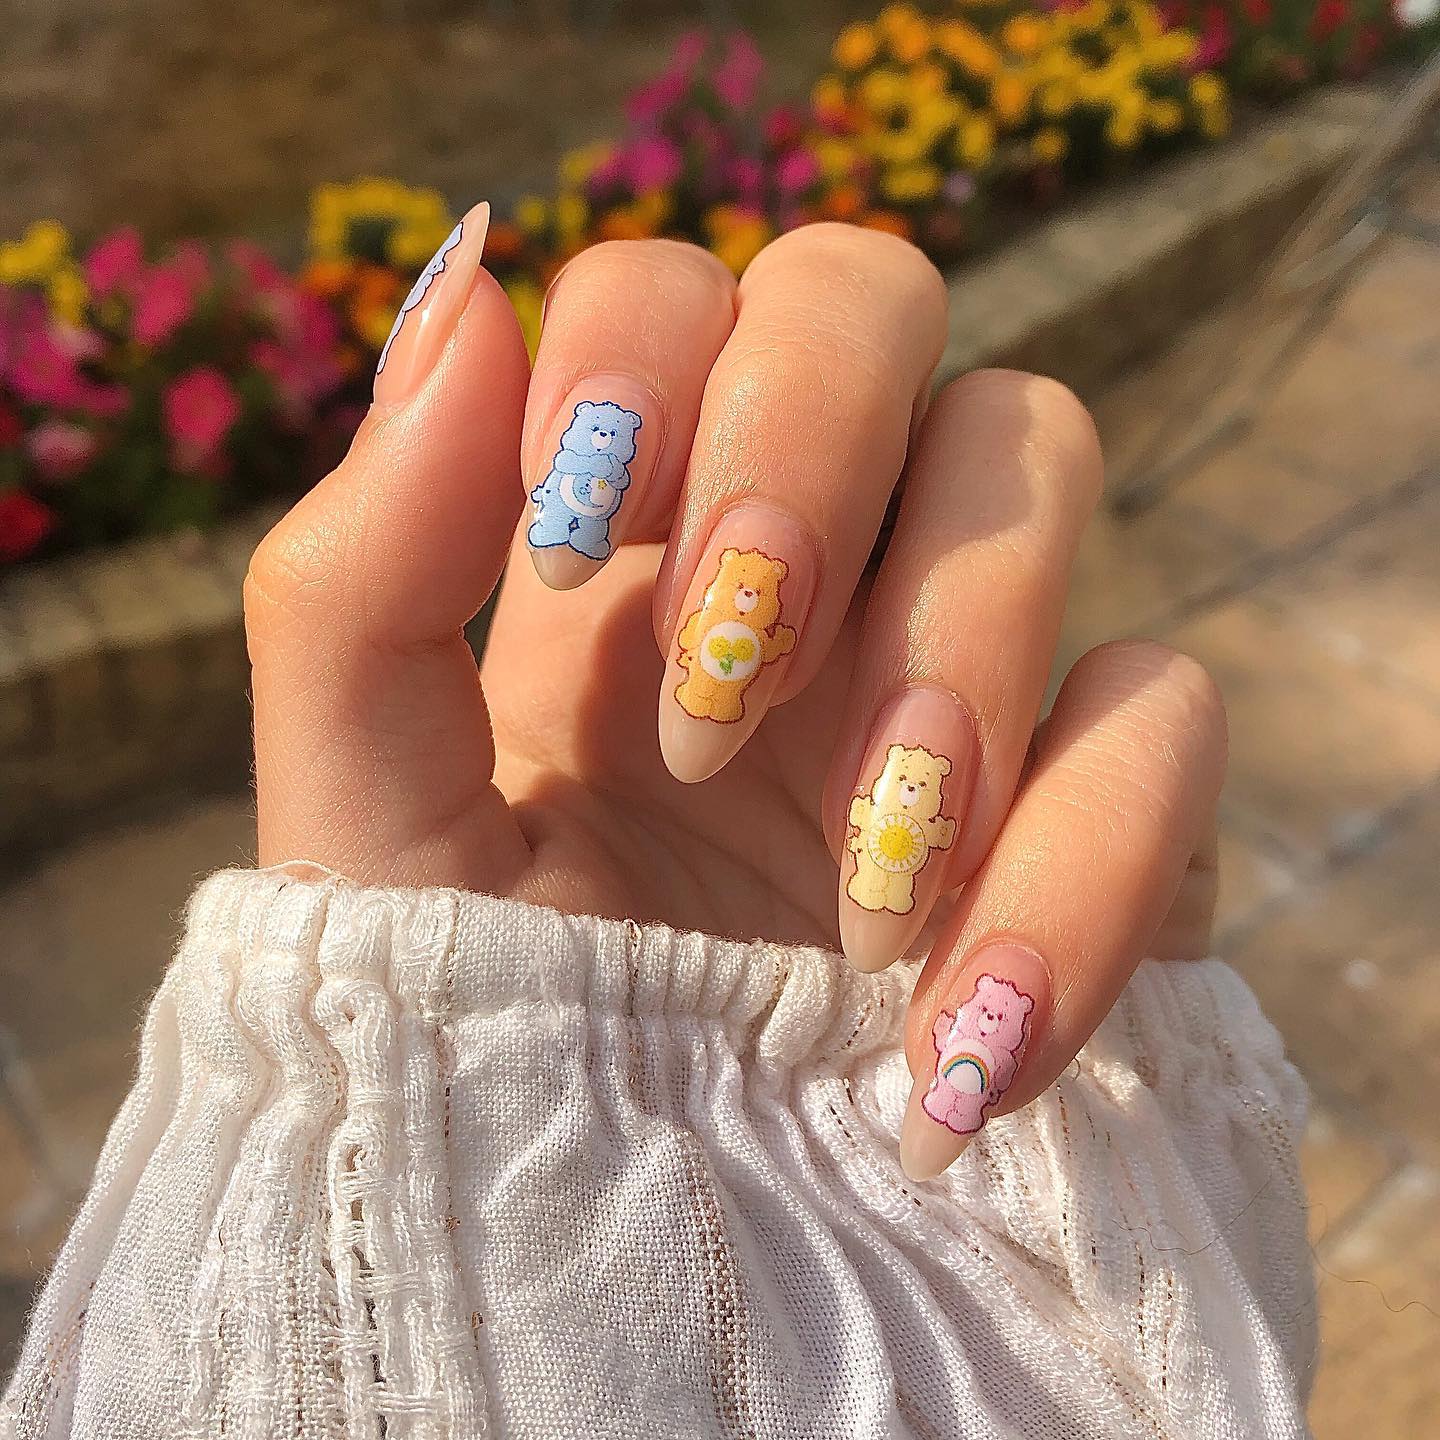  It doesn't matter how old you are, we girls always love teddy bears. Care bear stickers are so cute to try on nails. Plus, they are all colorful.